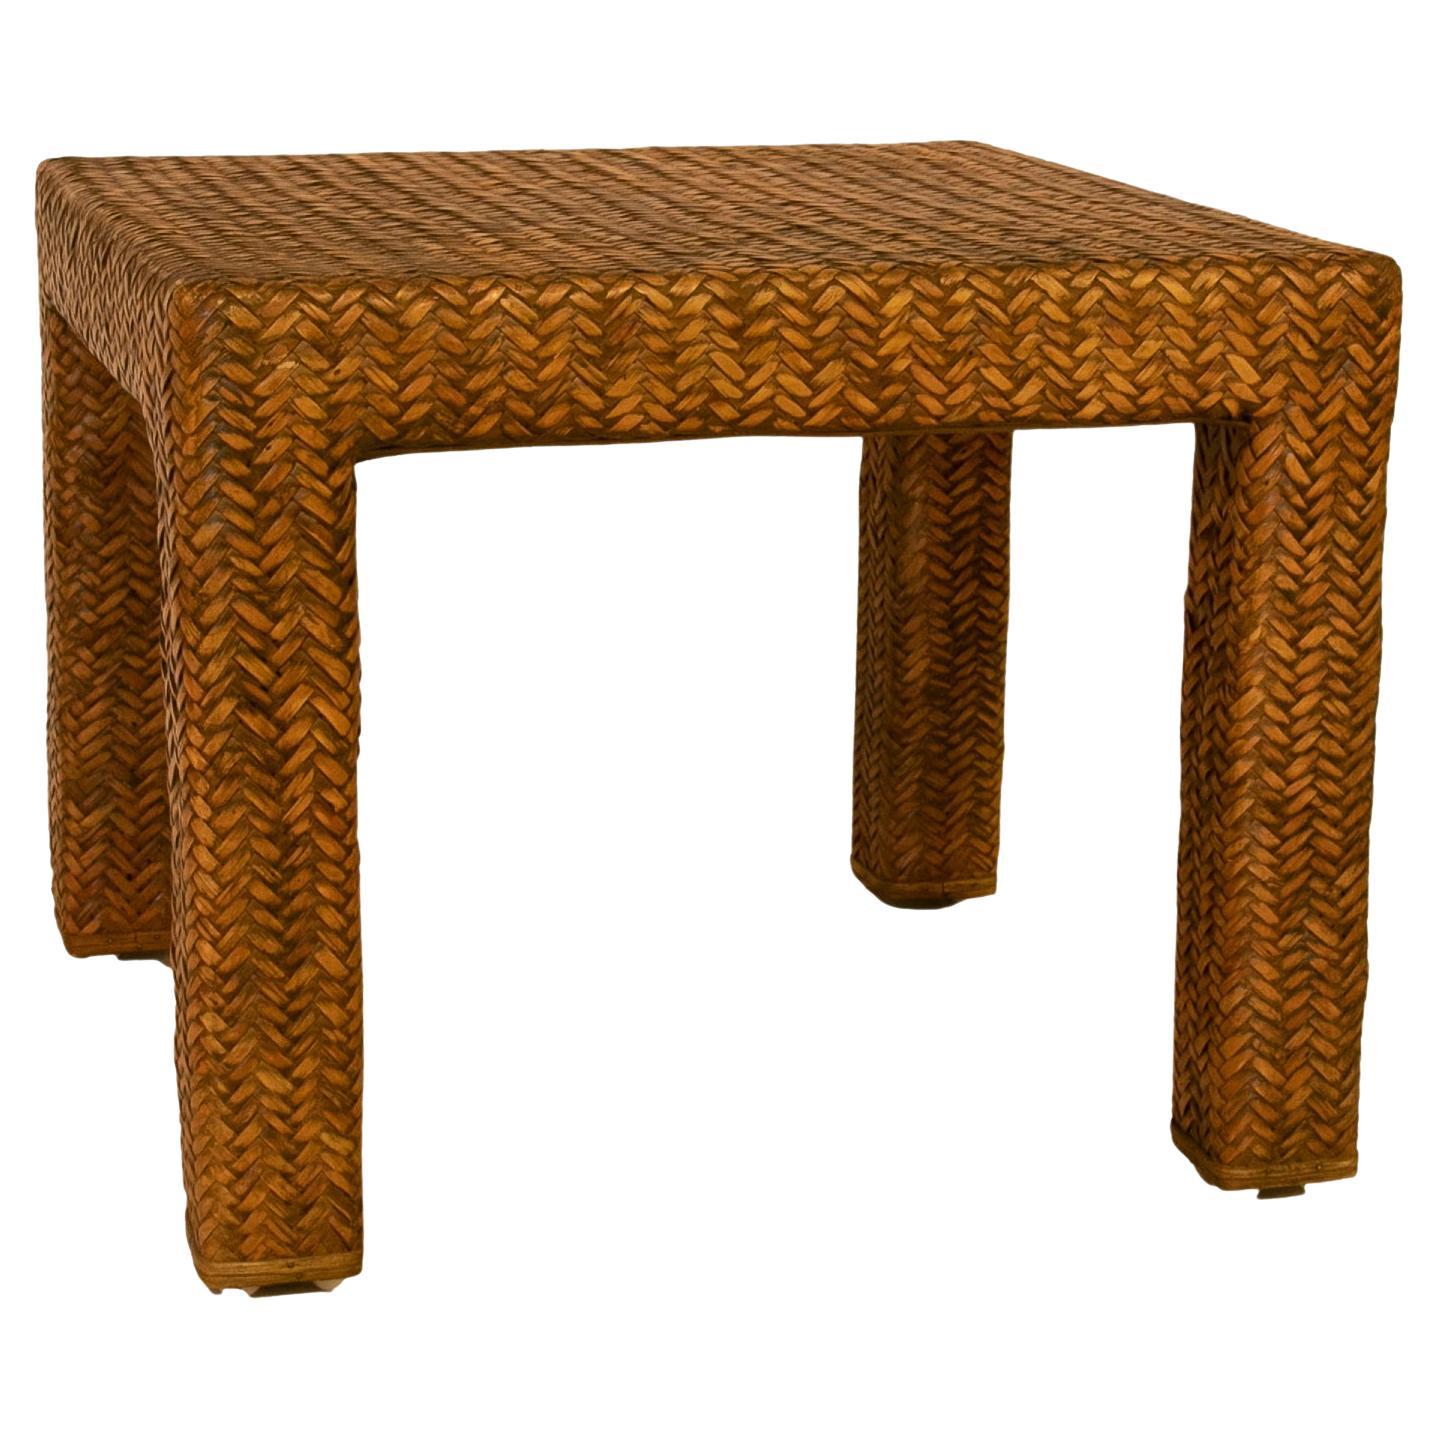 1990s Square Rattan Side Table 